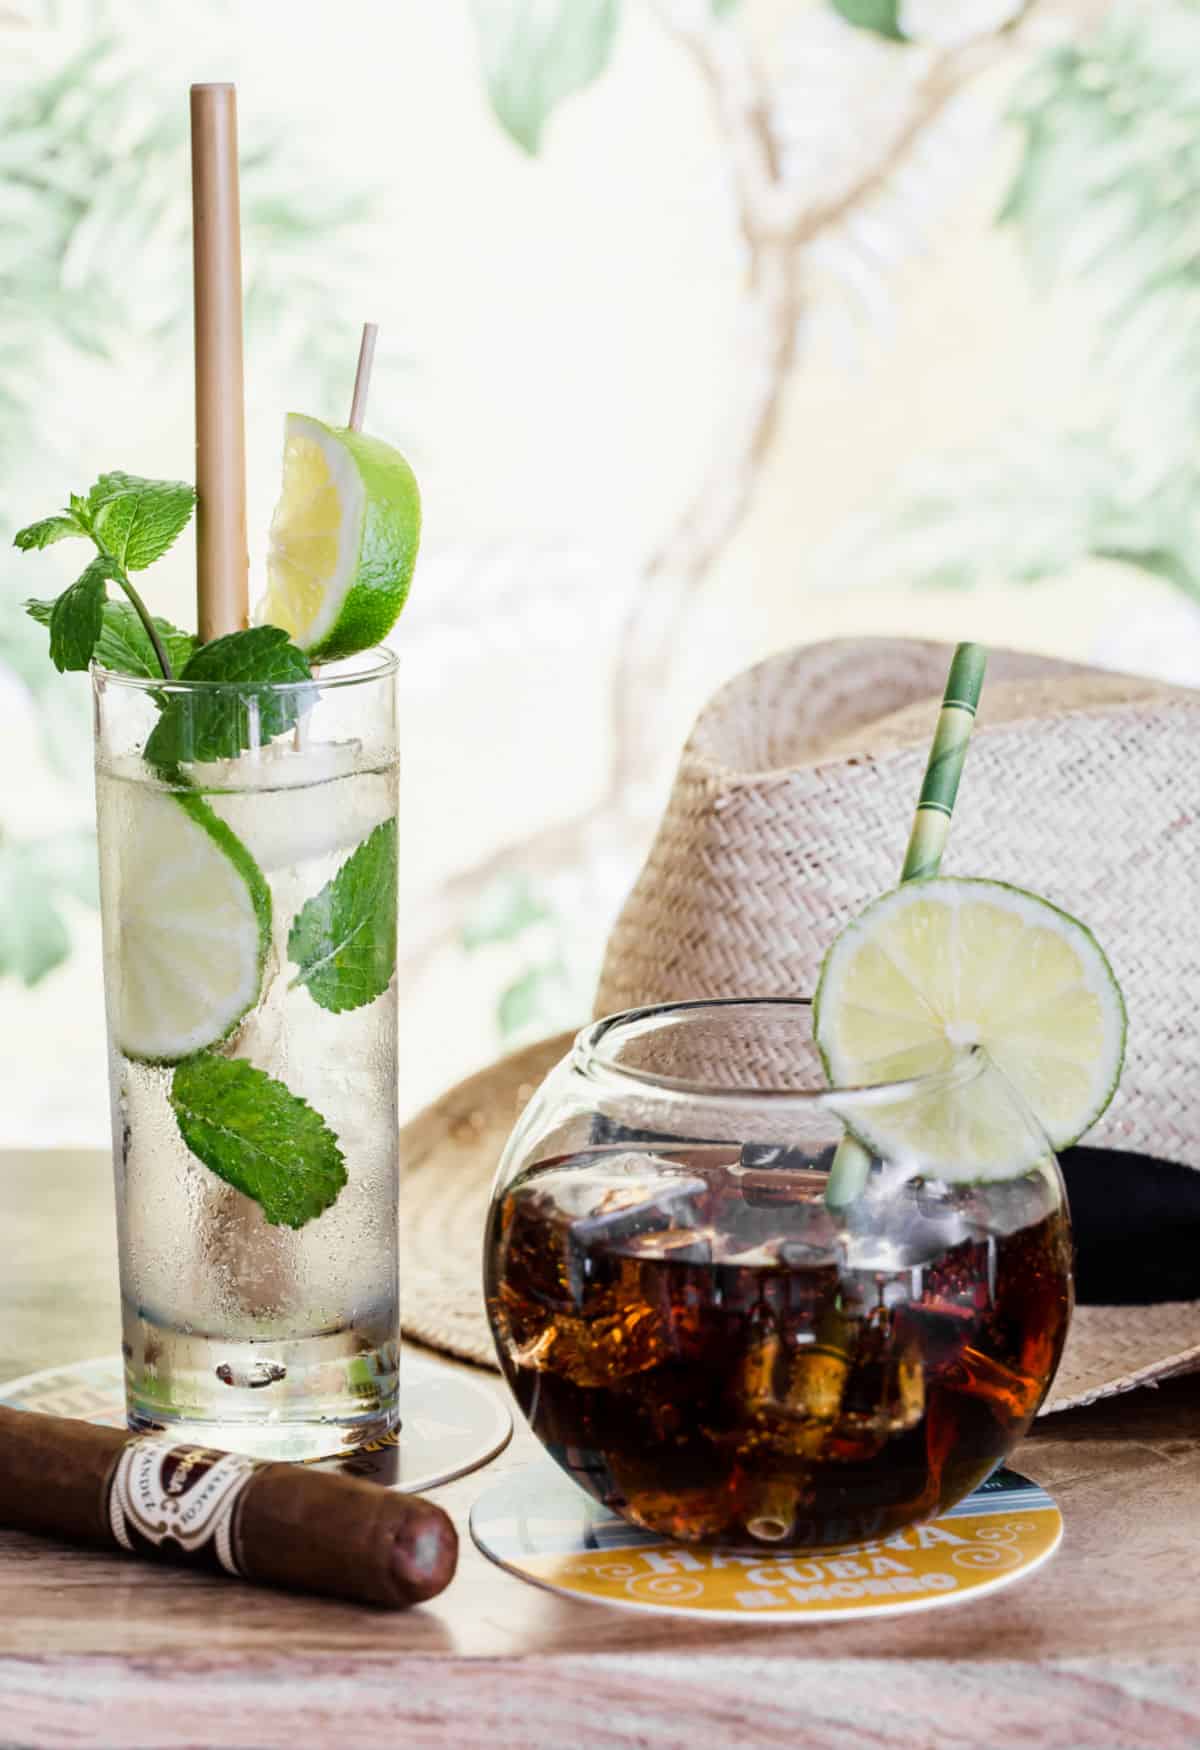 mojito and rum and coke drinks on wood table.